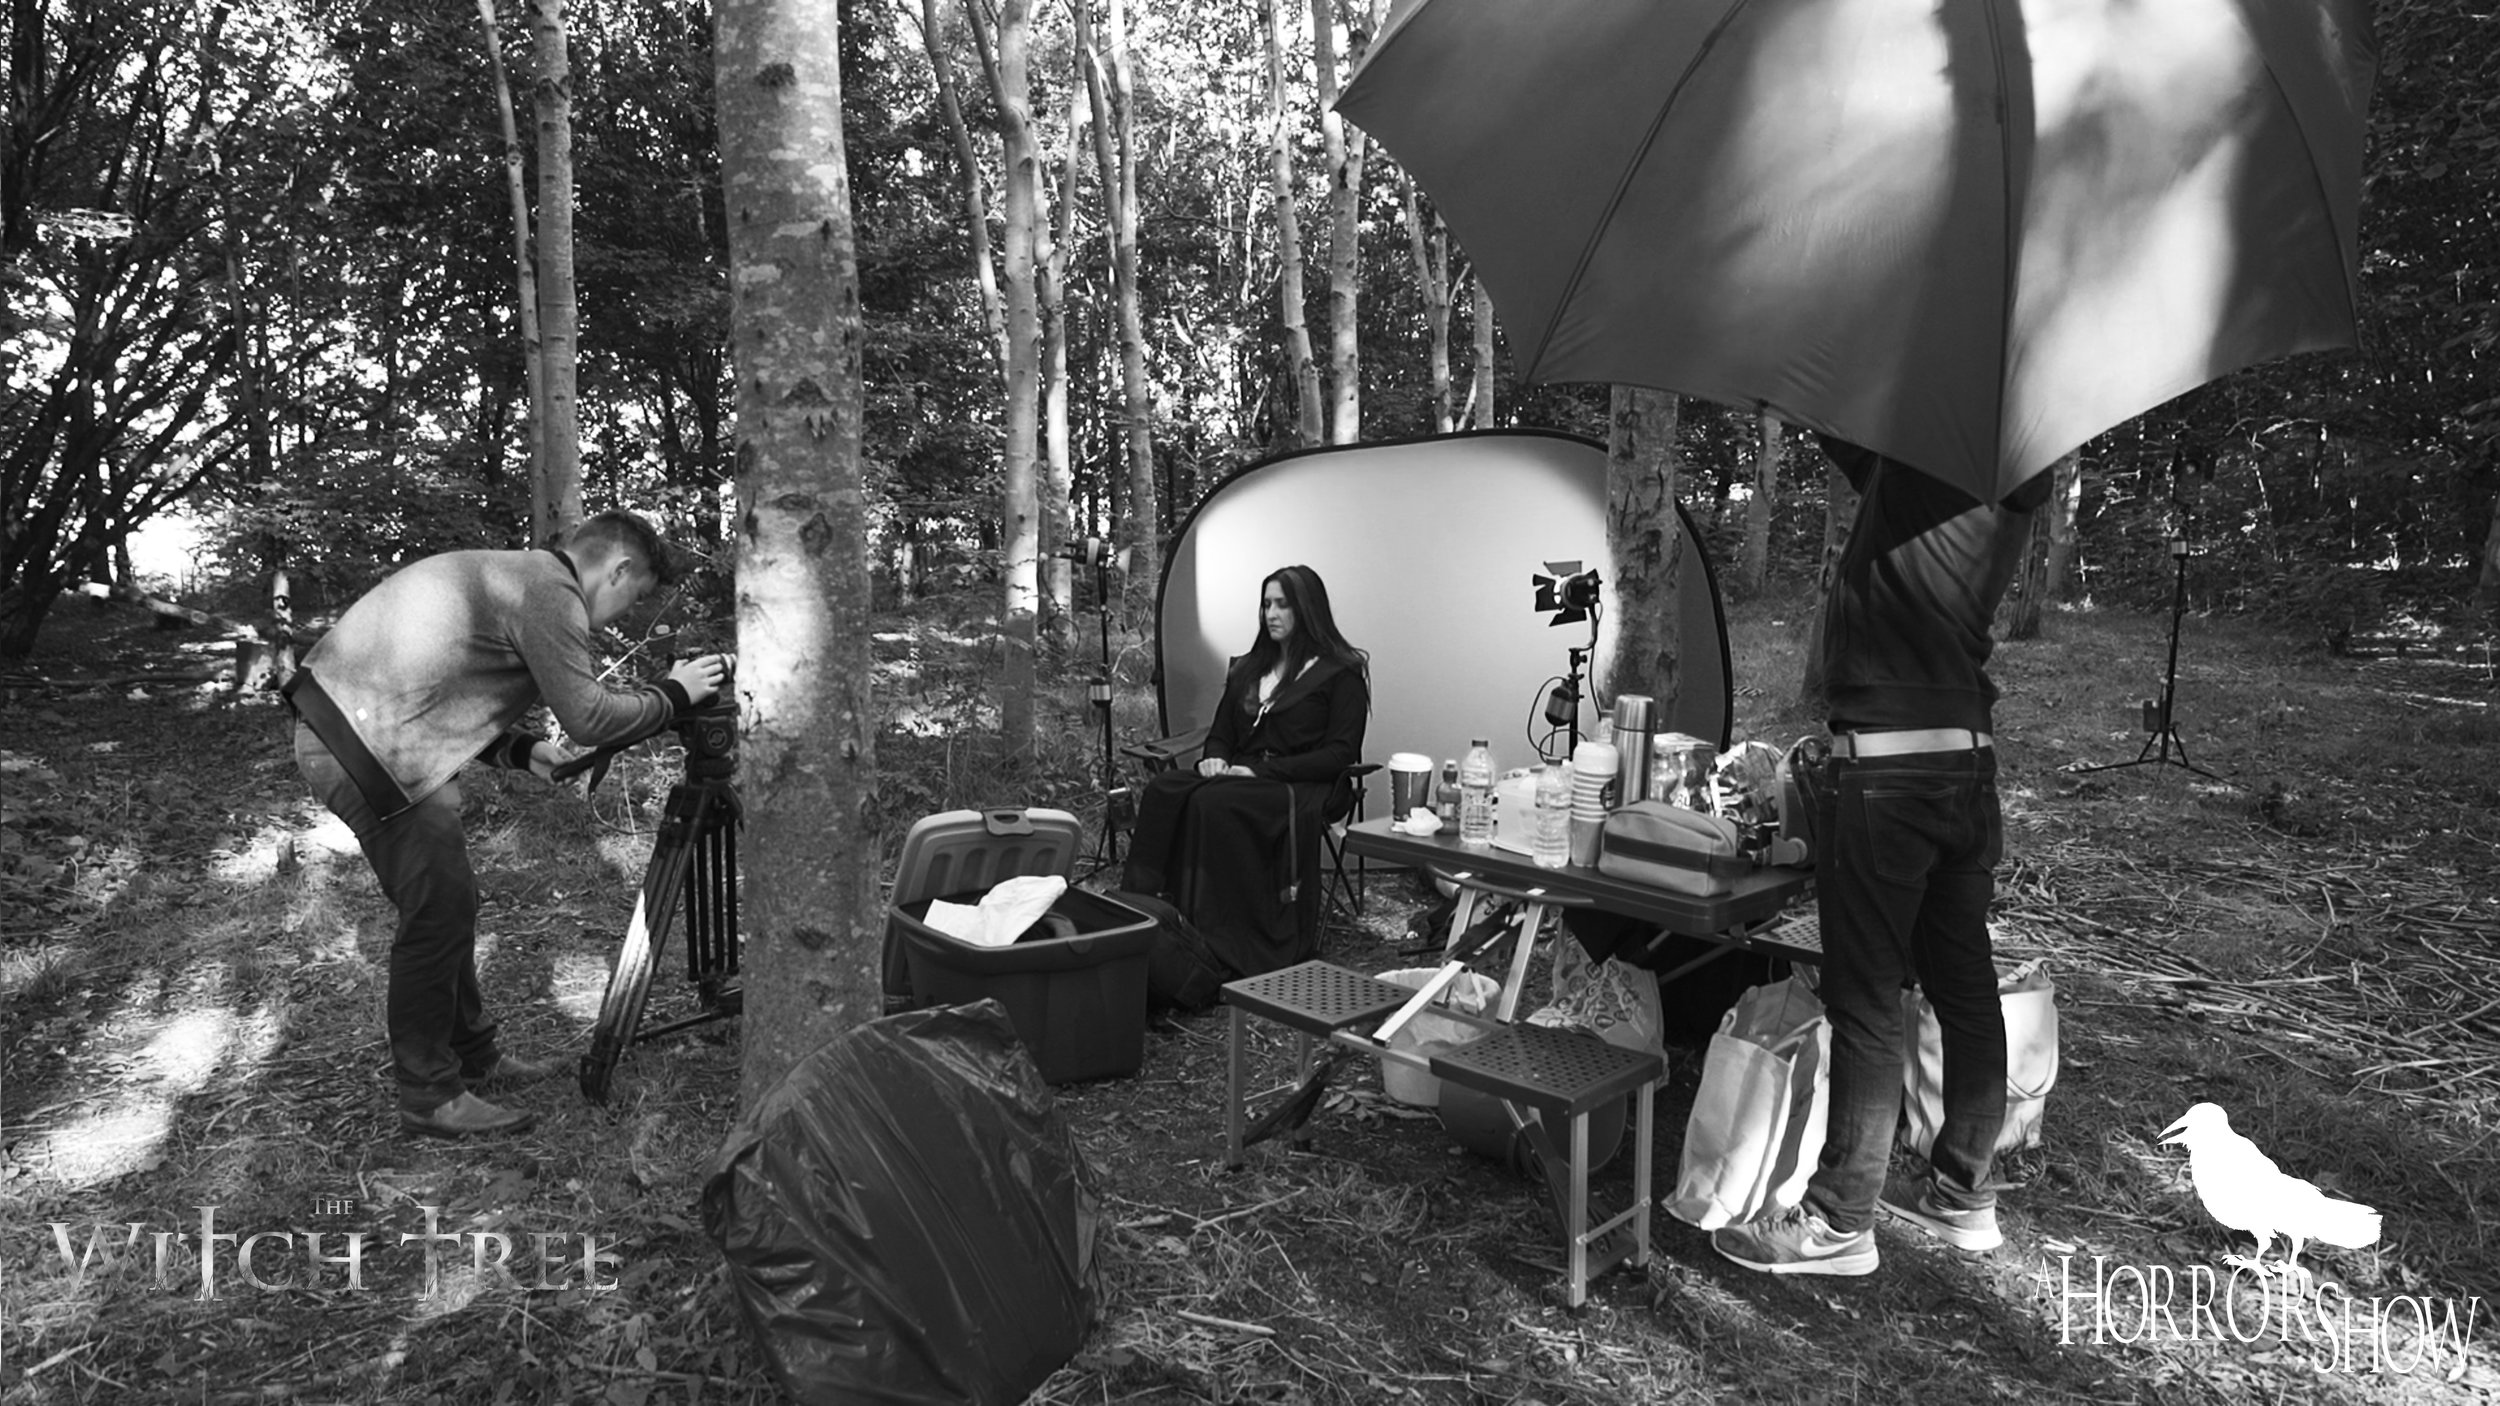  Behind the scenes of The Witch Tree. 